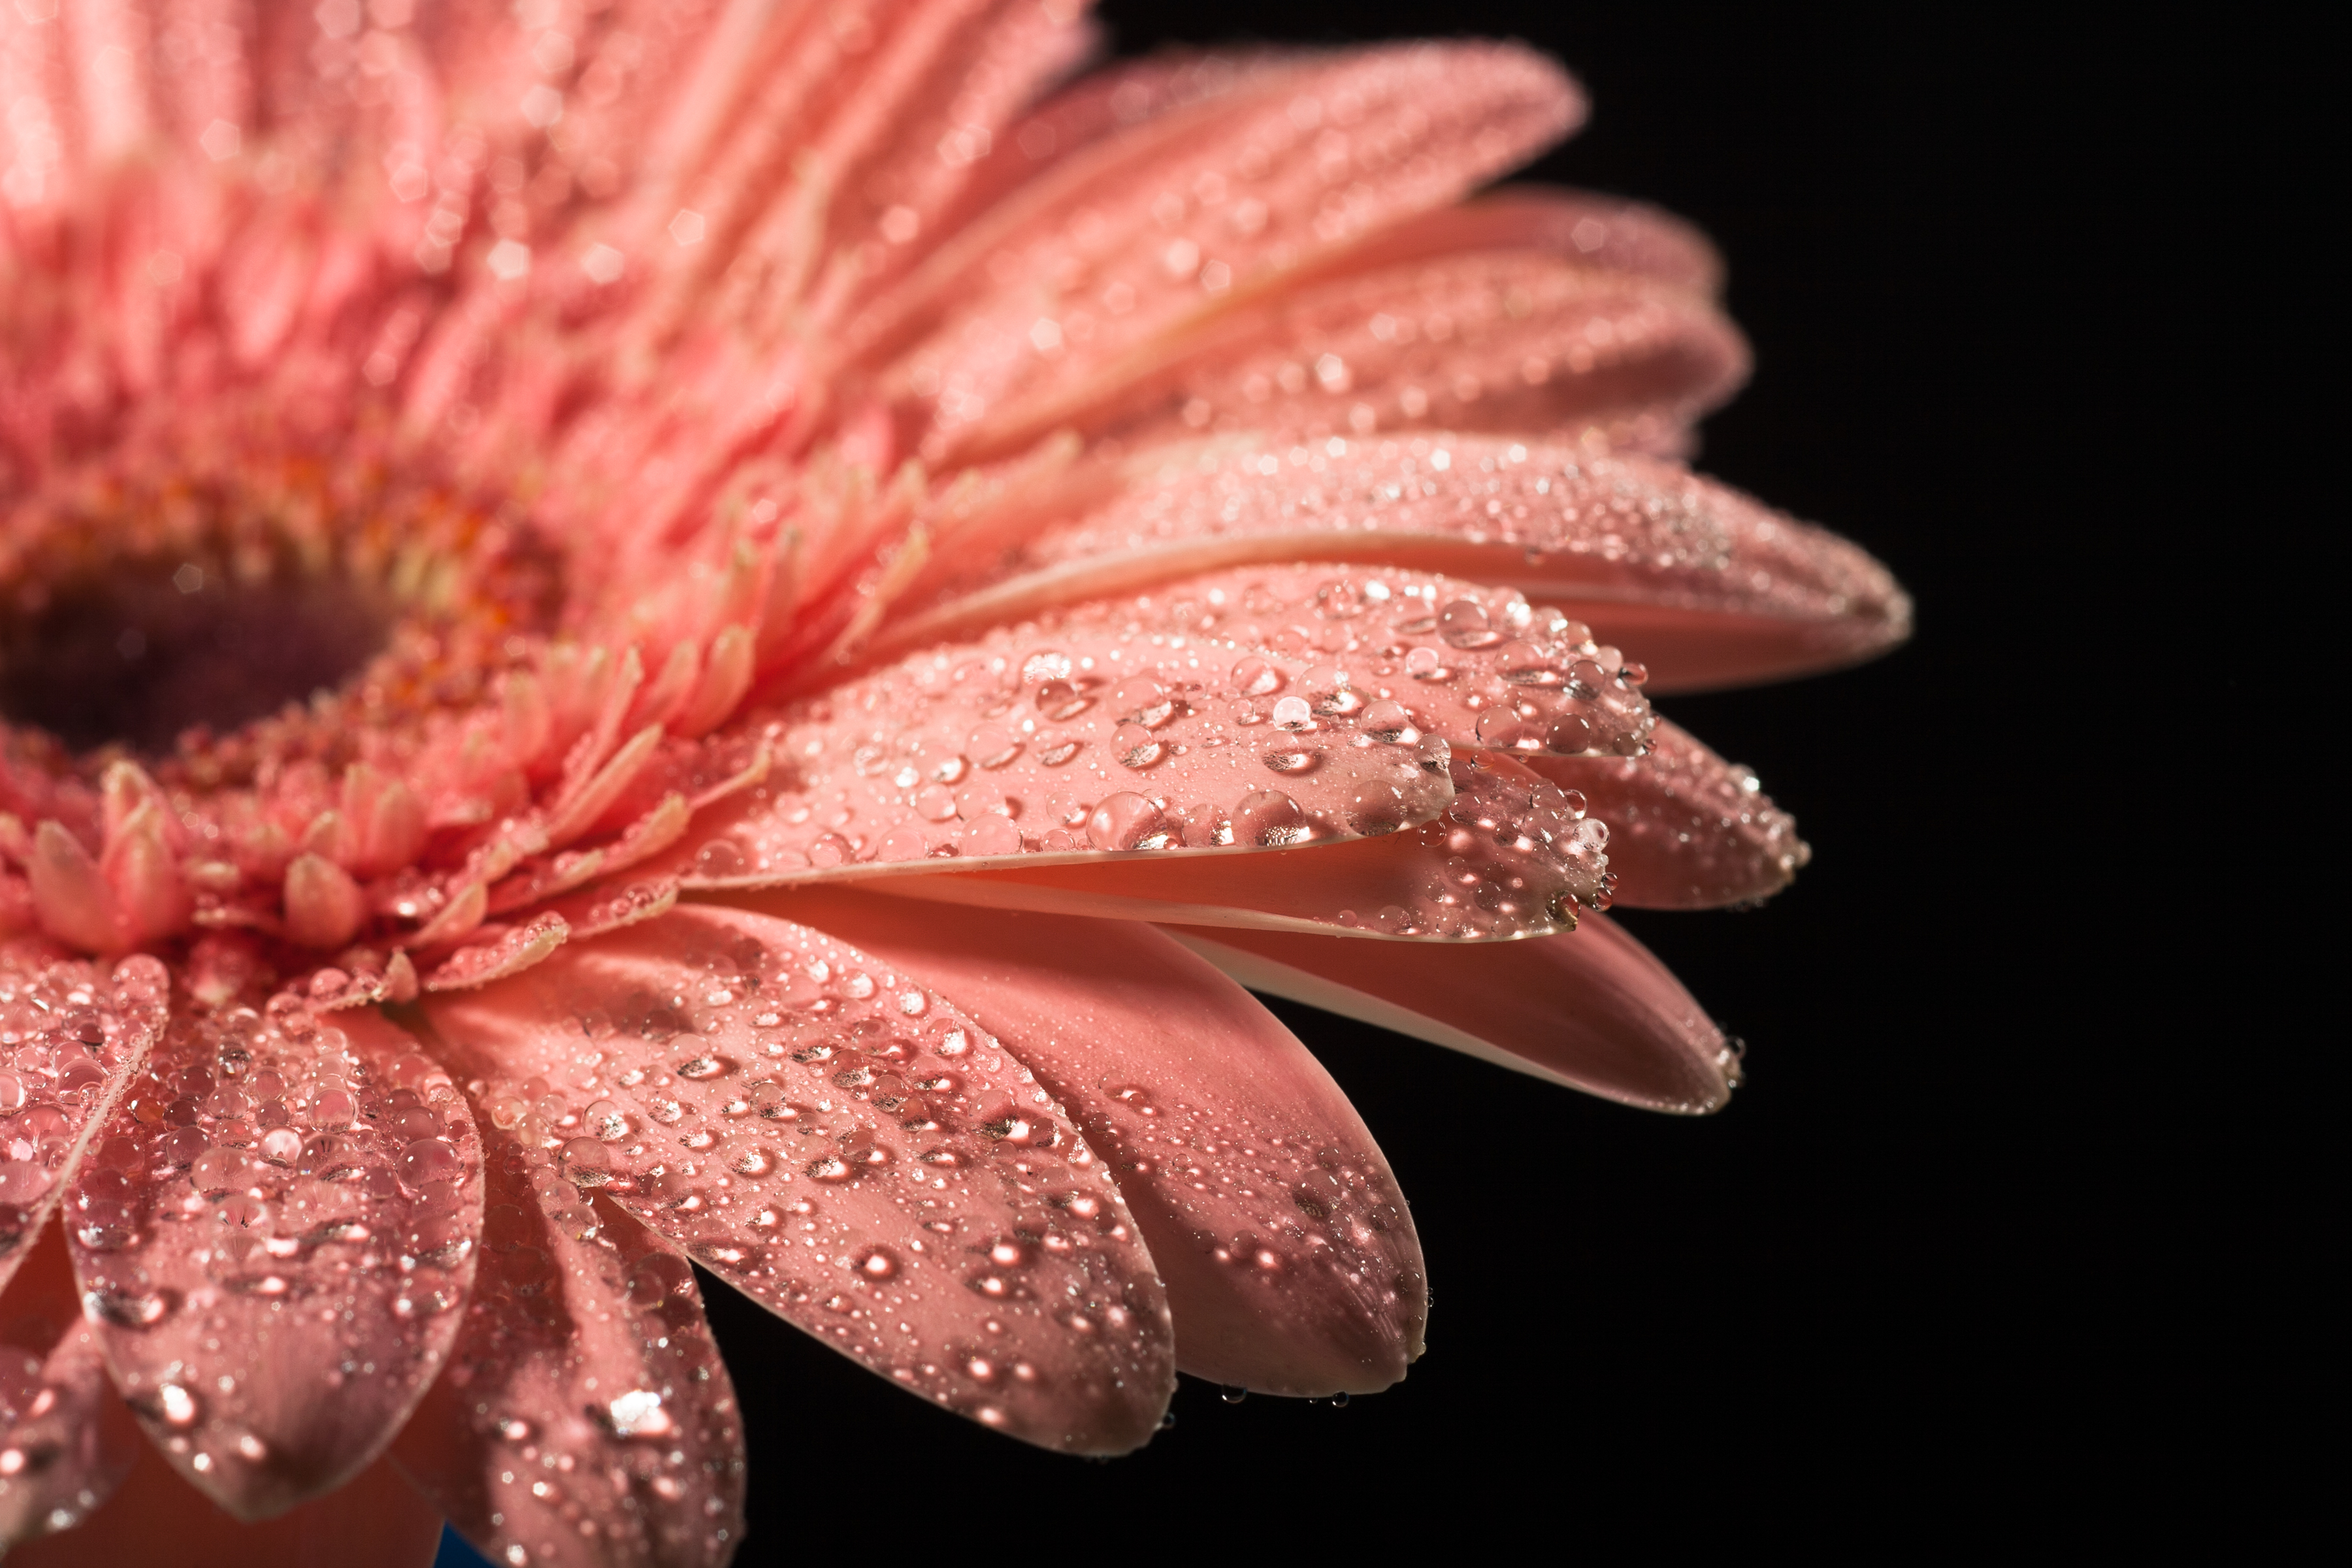 Water drops on flower petals photo